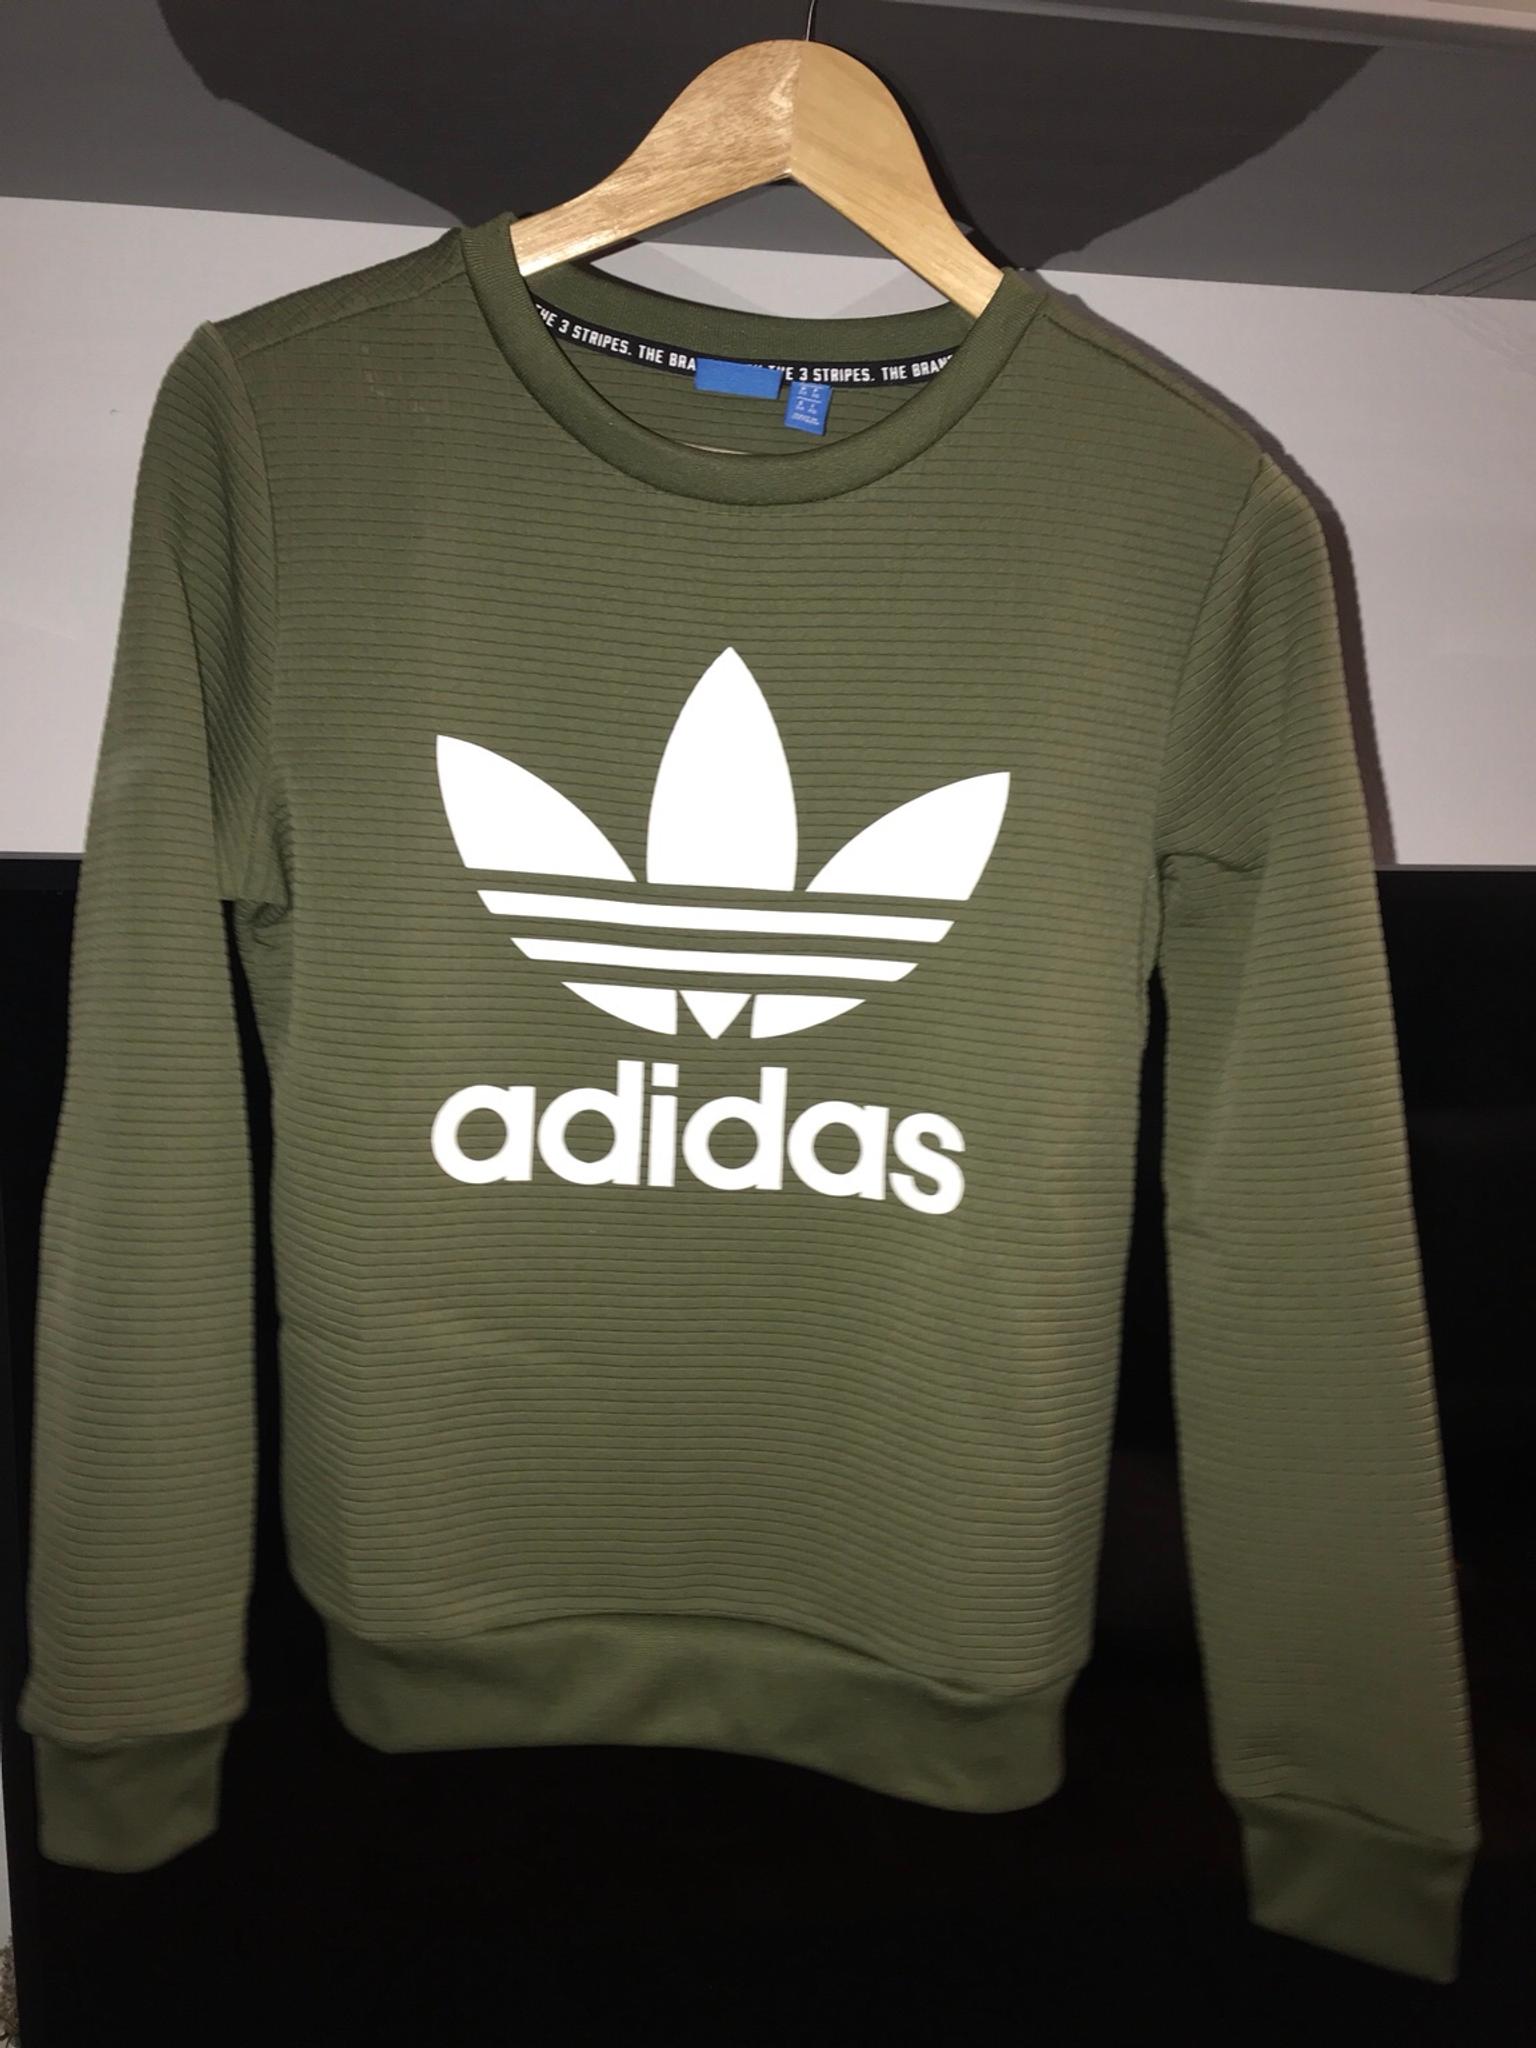 Adidas Pullover In 8134 Adliswil For Chf 65 00 For Sale Shpock